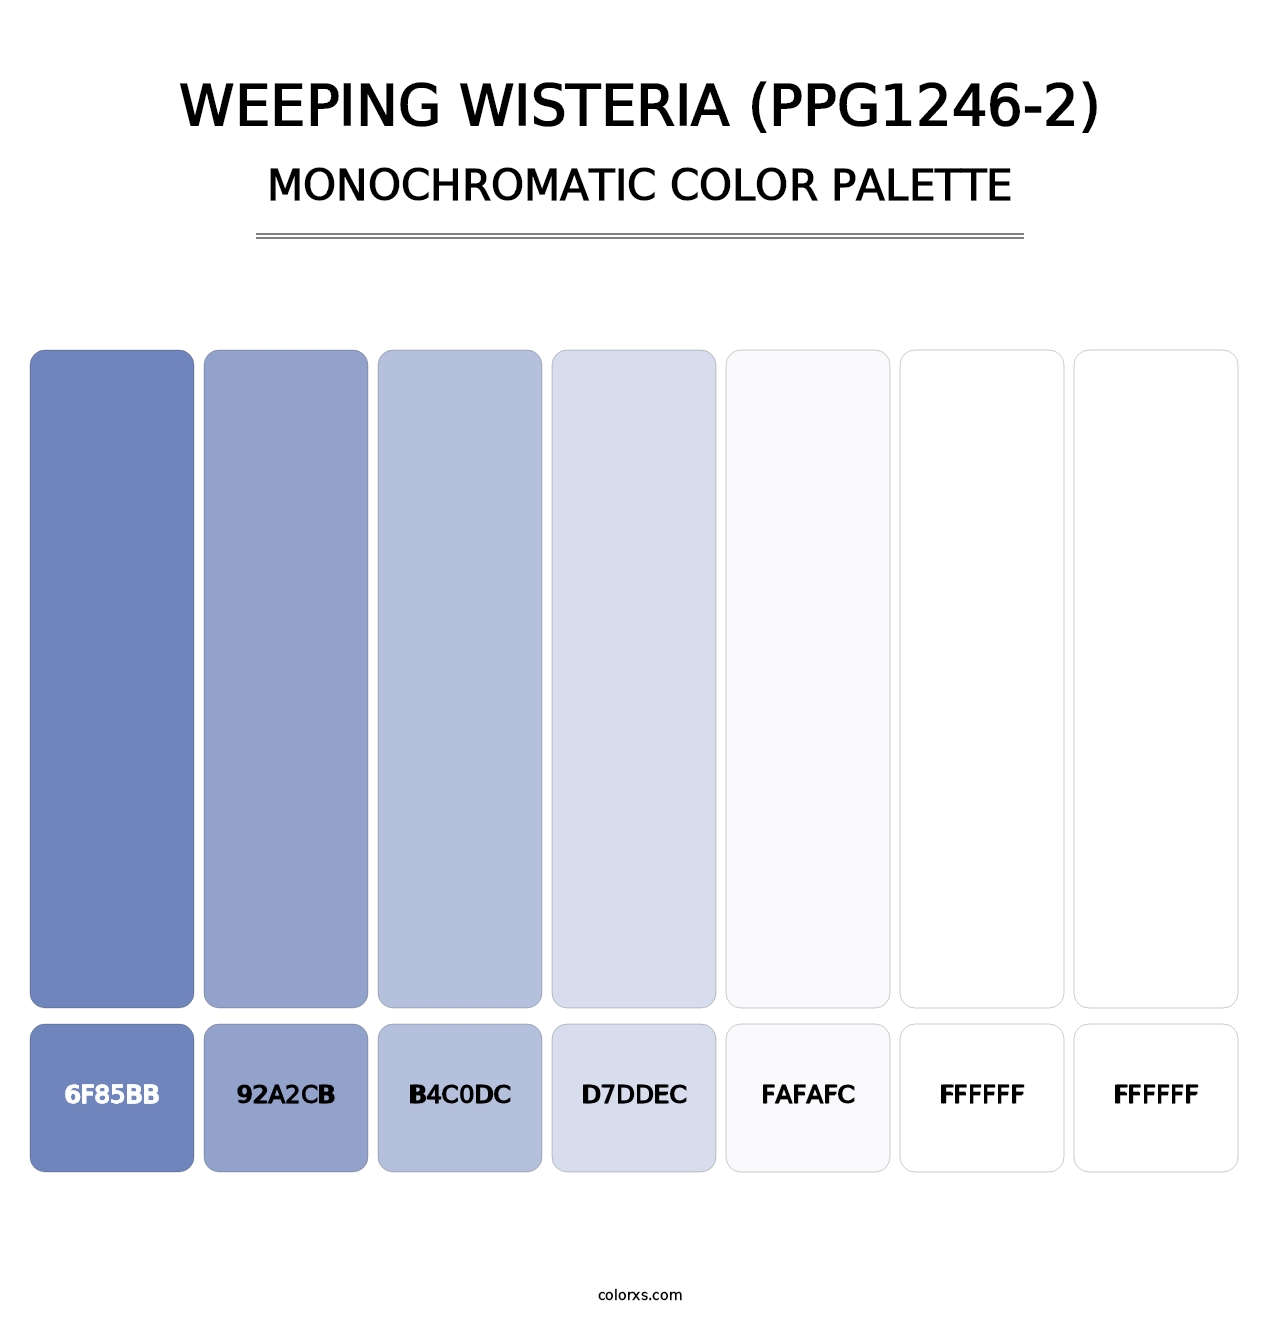 Weeping Wisteria (PPG1246-2) - Monochromatic Color Palette